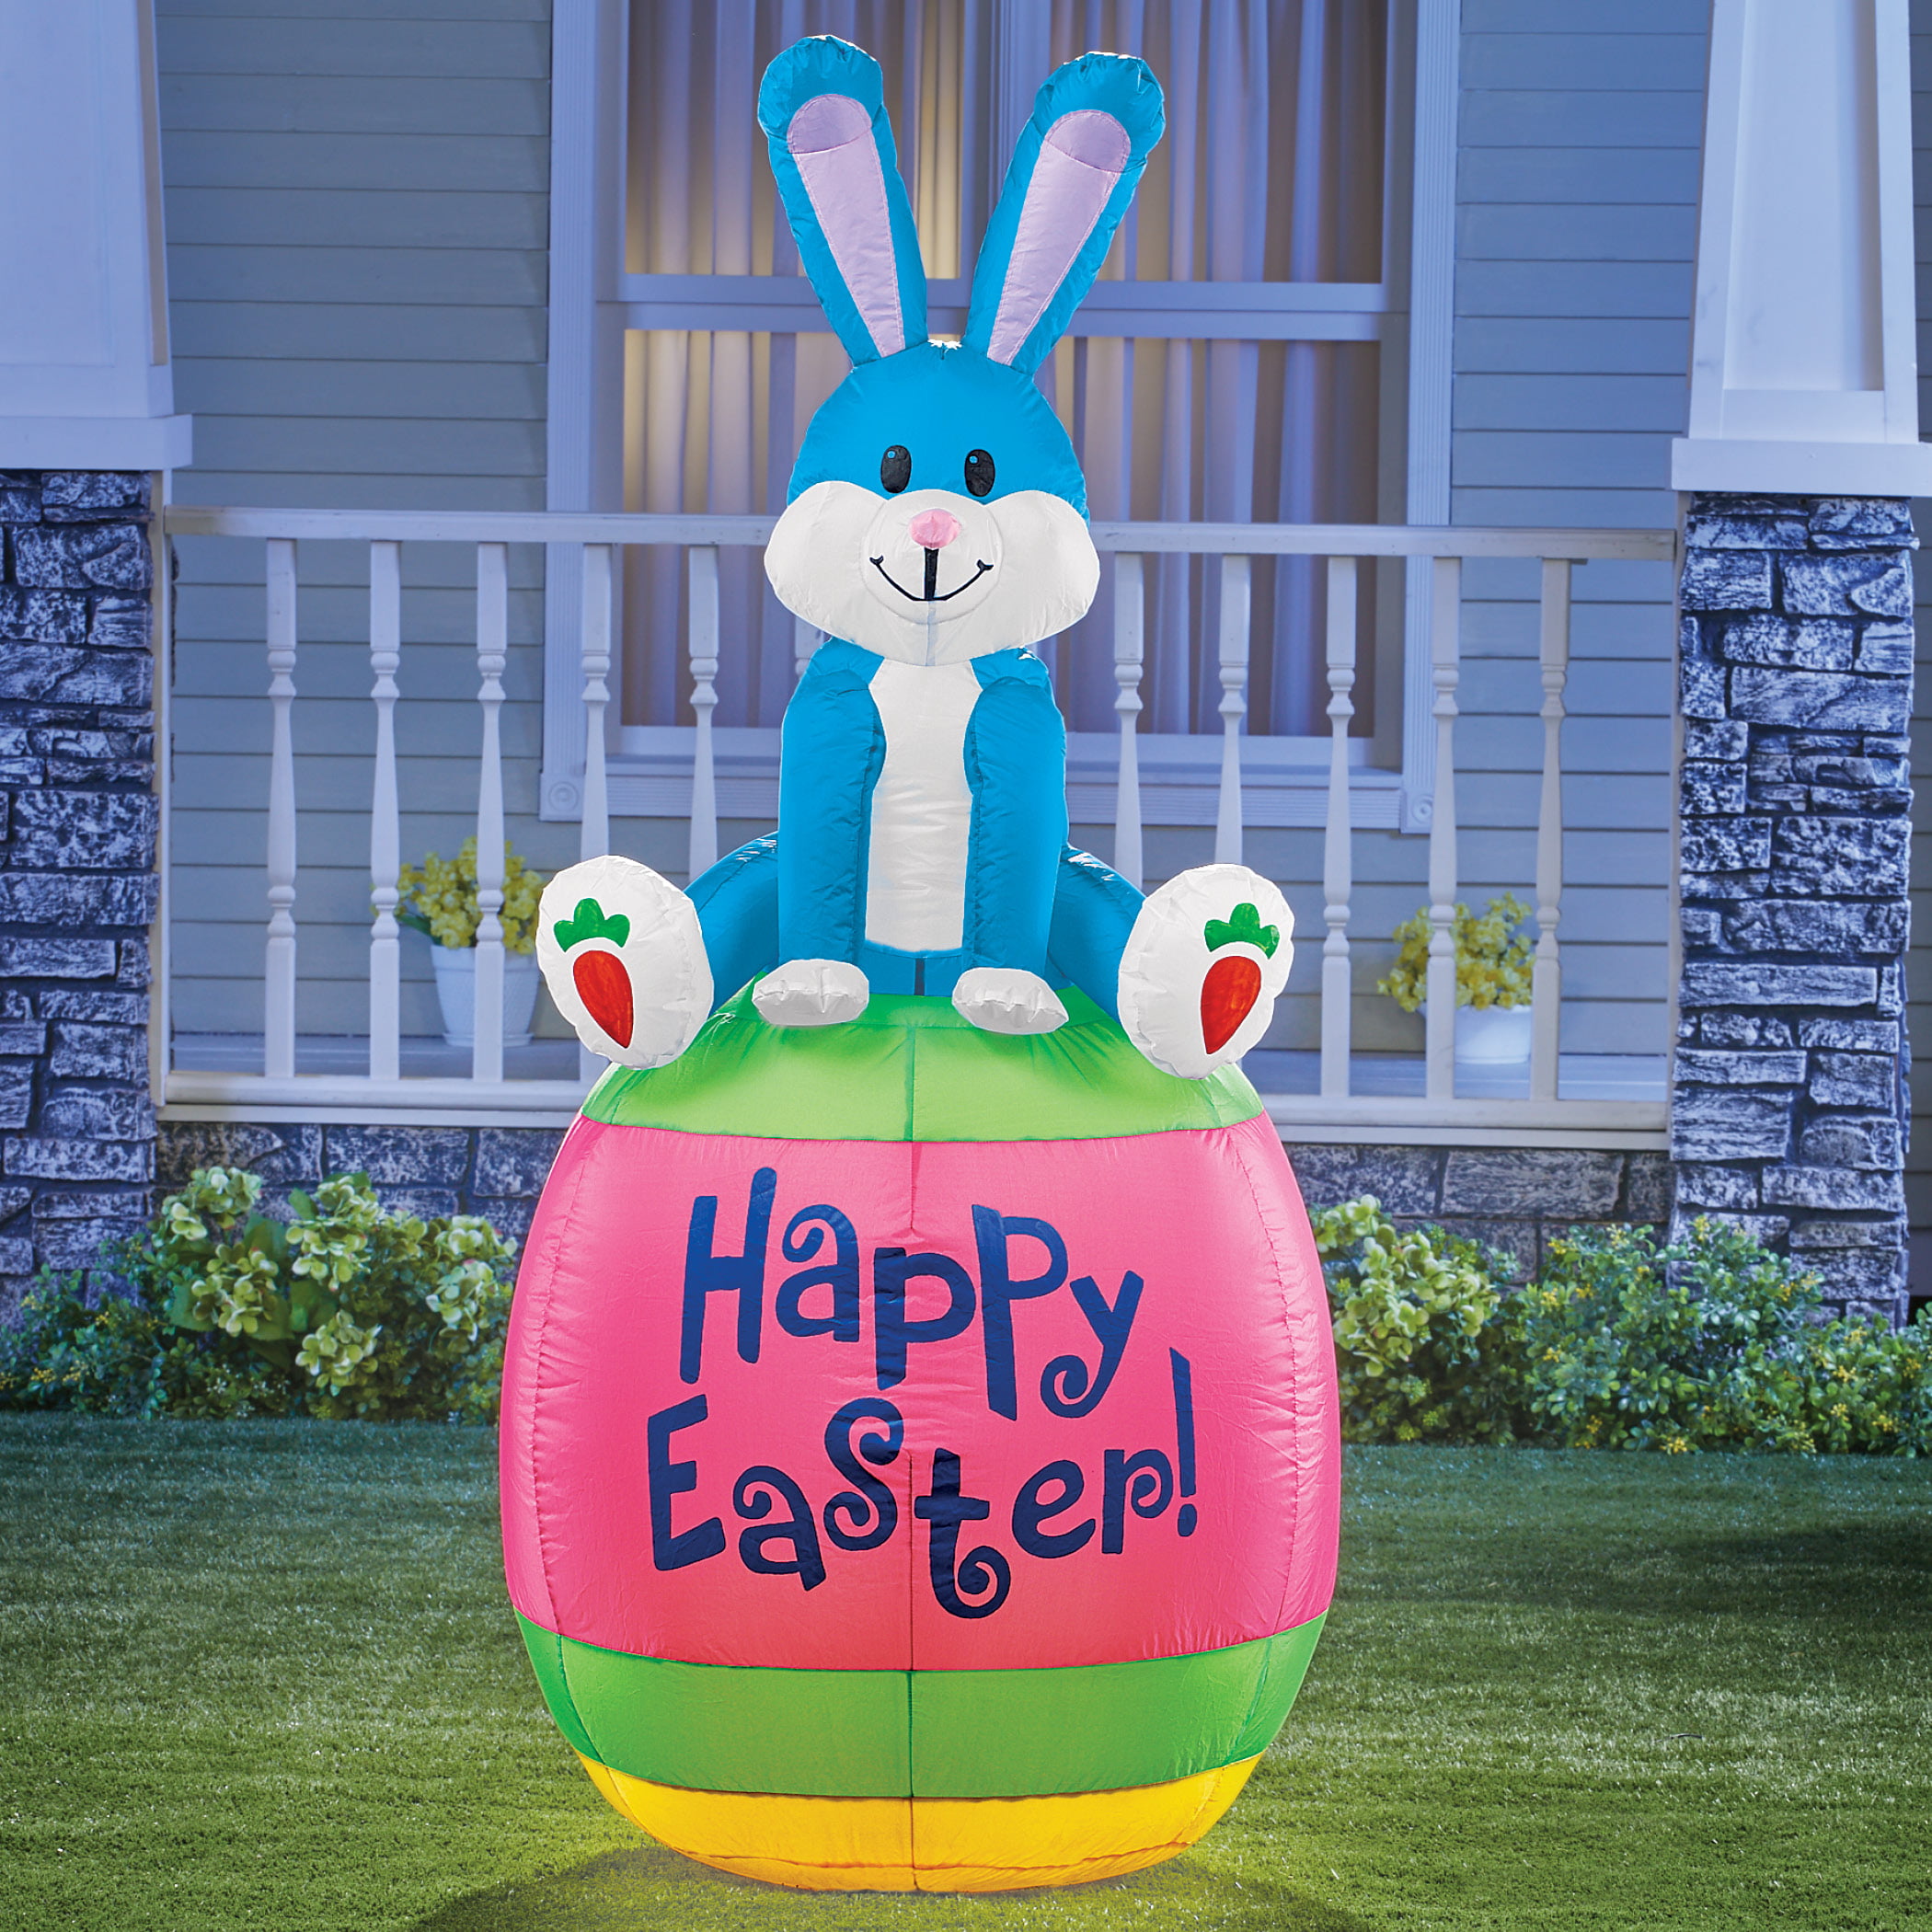 52 Top Photos Inflatable Easter Yard Decorations : 54 in Tall Inflatable Bunny Eggs Airblown Easter Holiday ...